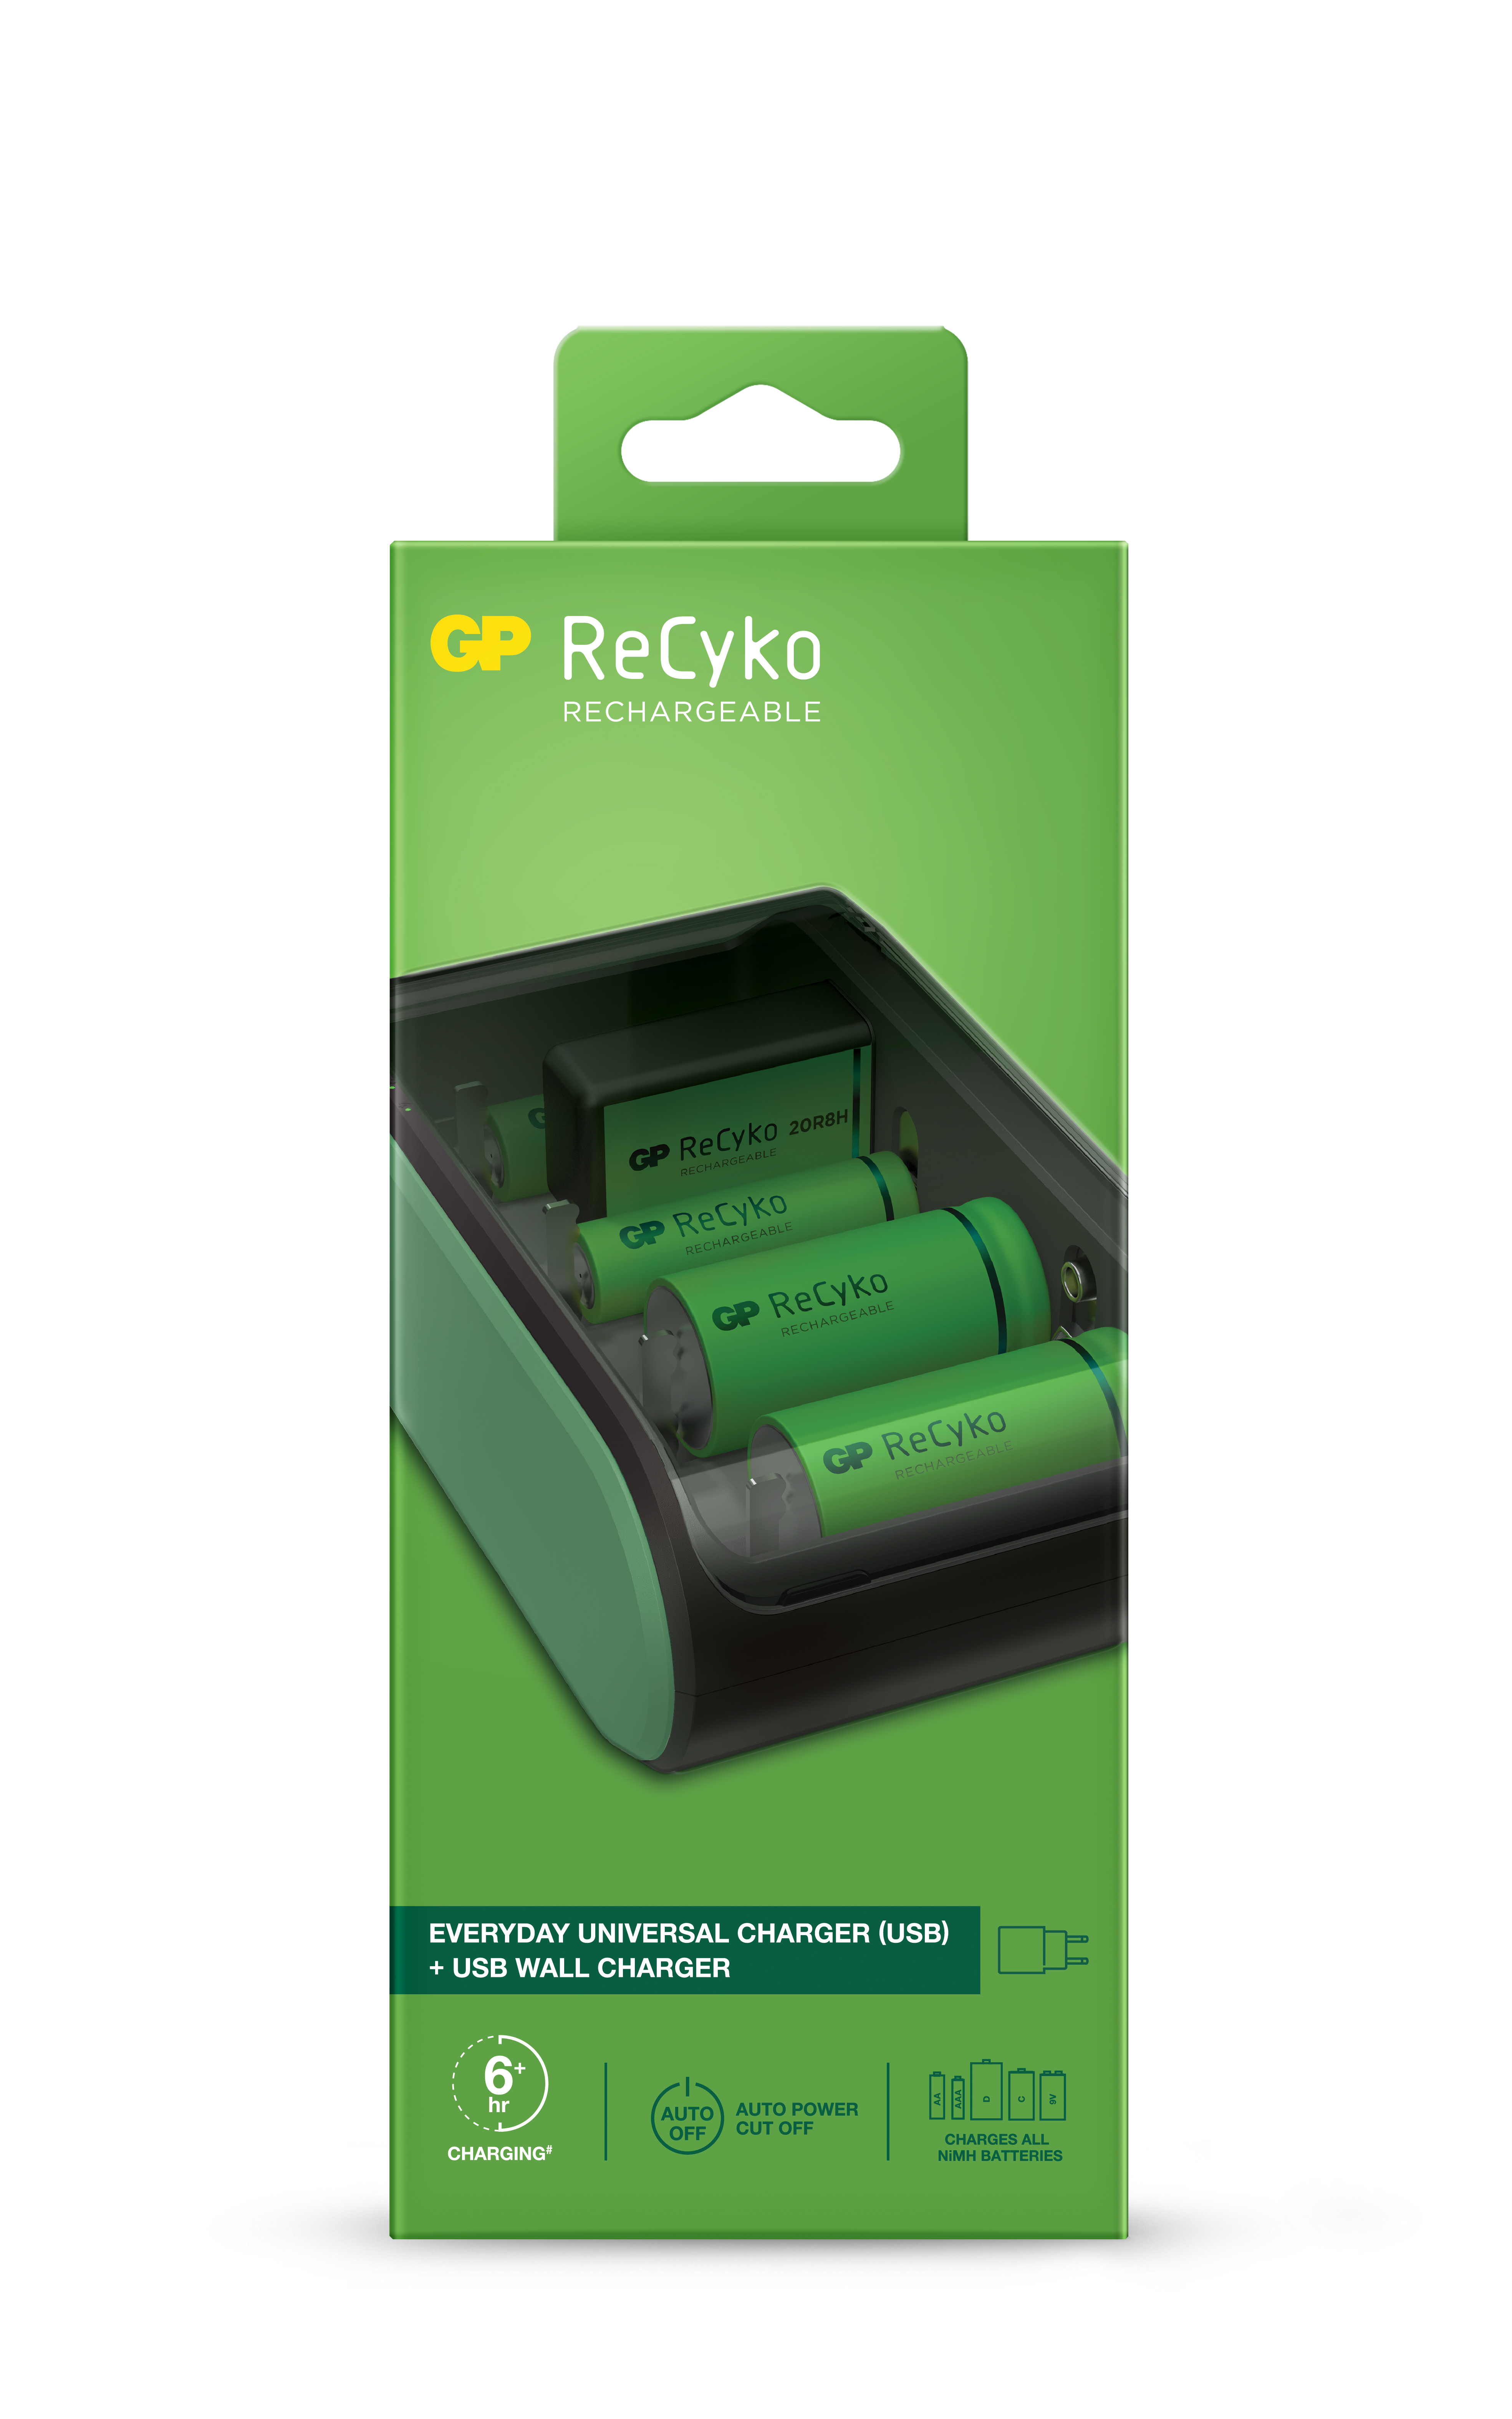 Chargeur USB universel GP ReCyko - Recharge les piles : AA, AAA, C, D et 9V